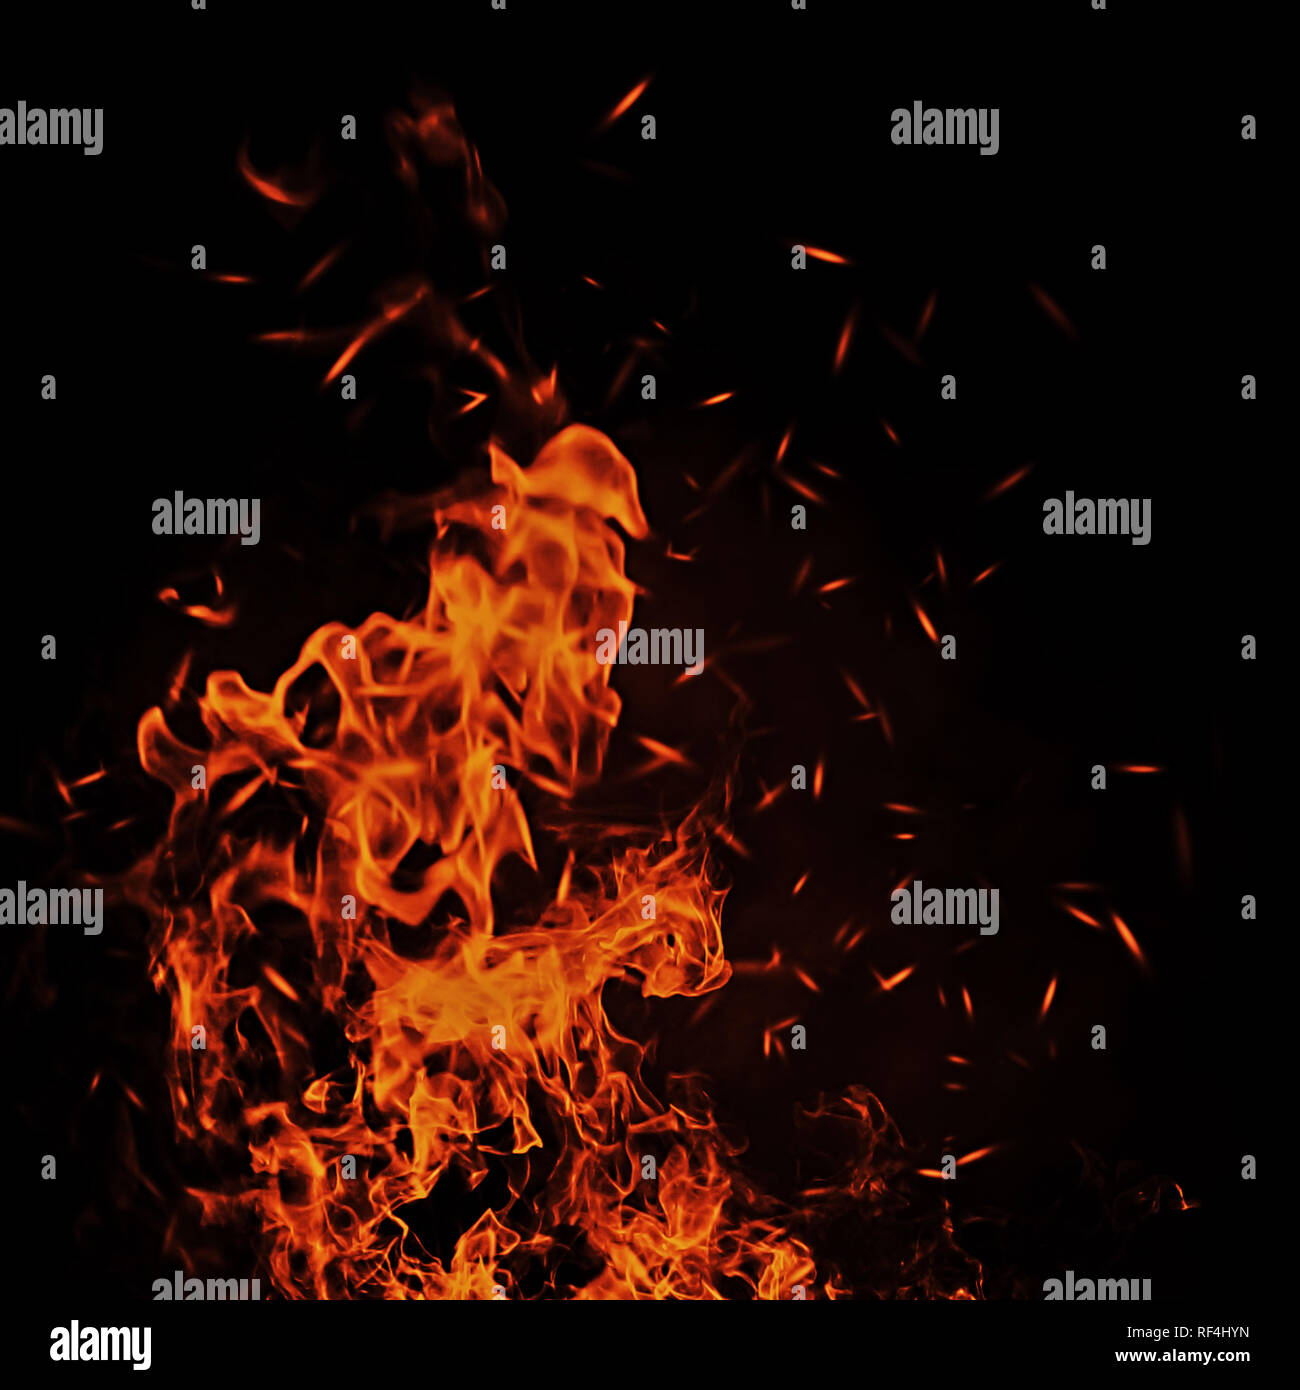 Vintage abstract flames with fire particles embers on isolated background. Stock Photo